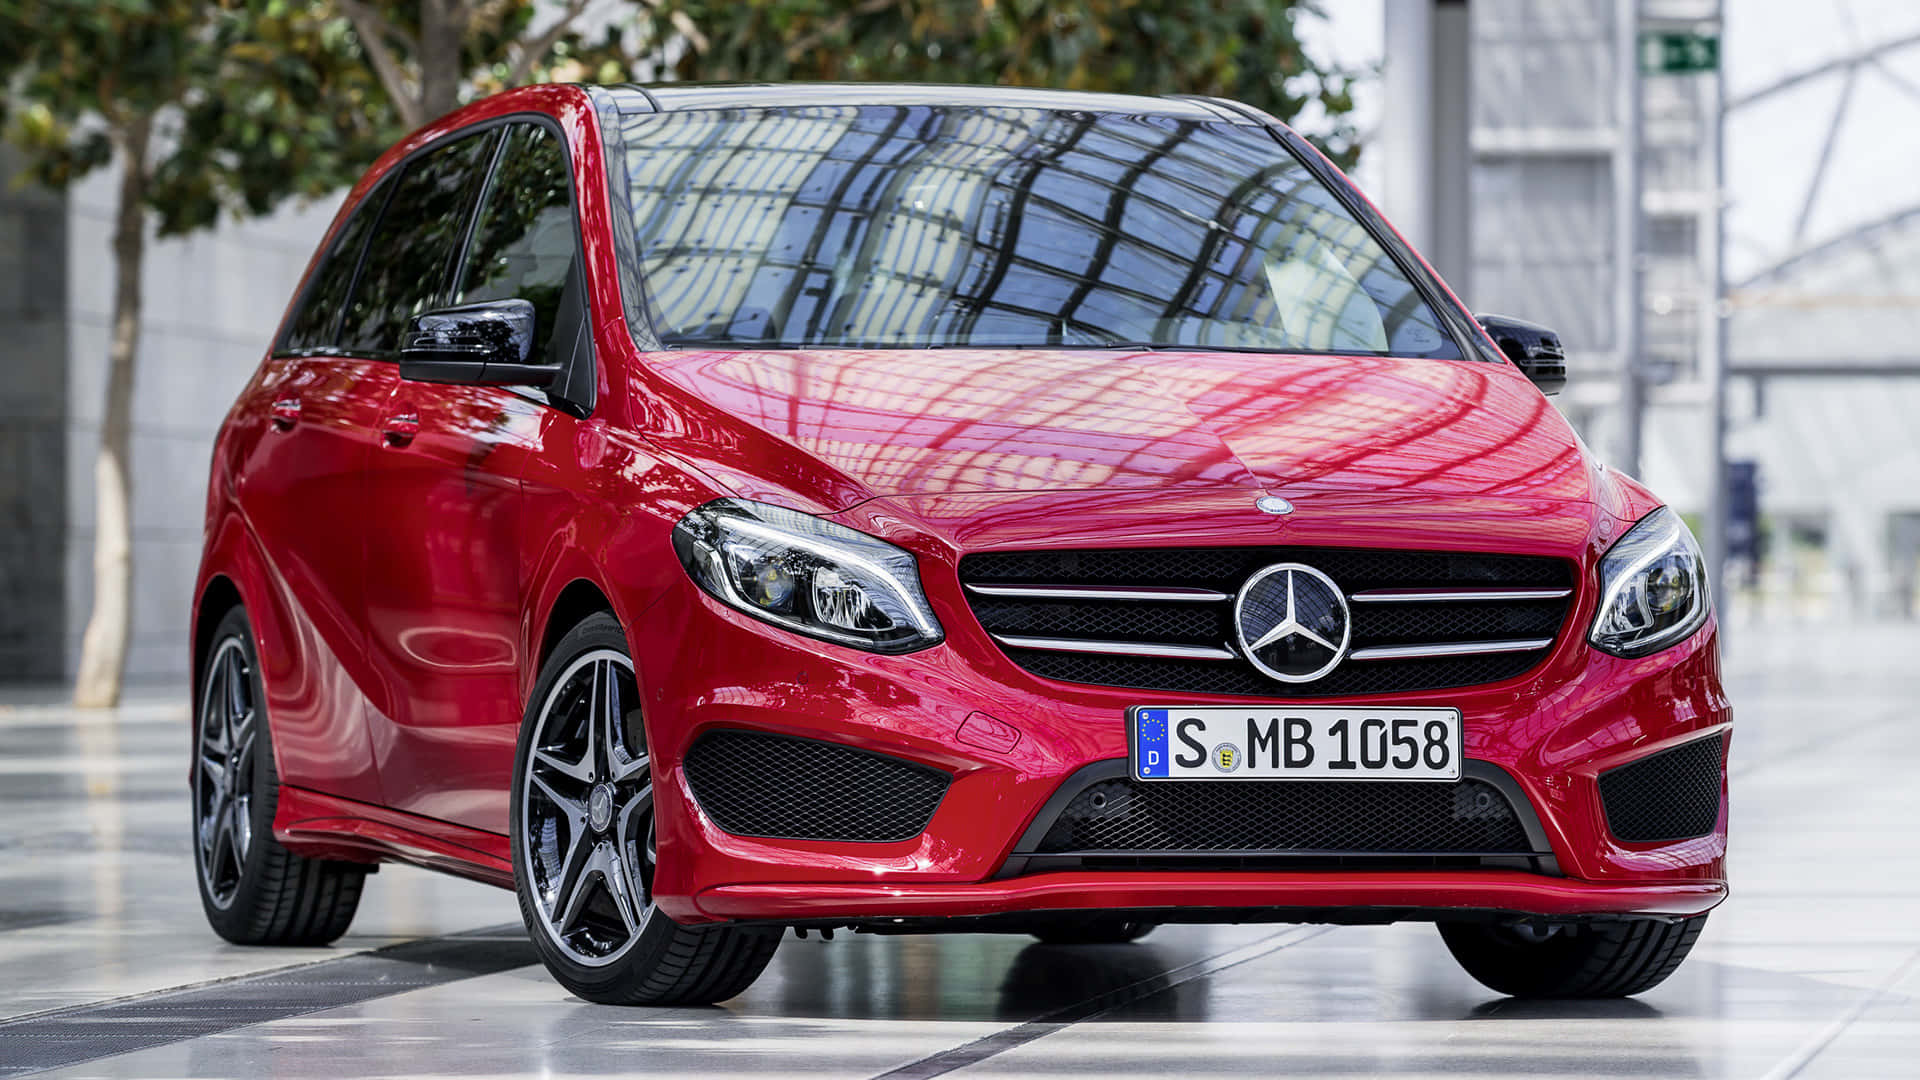 Caption: Sleek and Stylish Mercedes Benz B-Class in Action Wallpaper